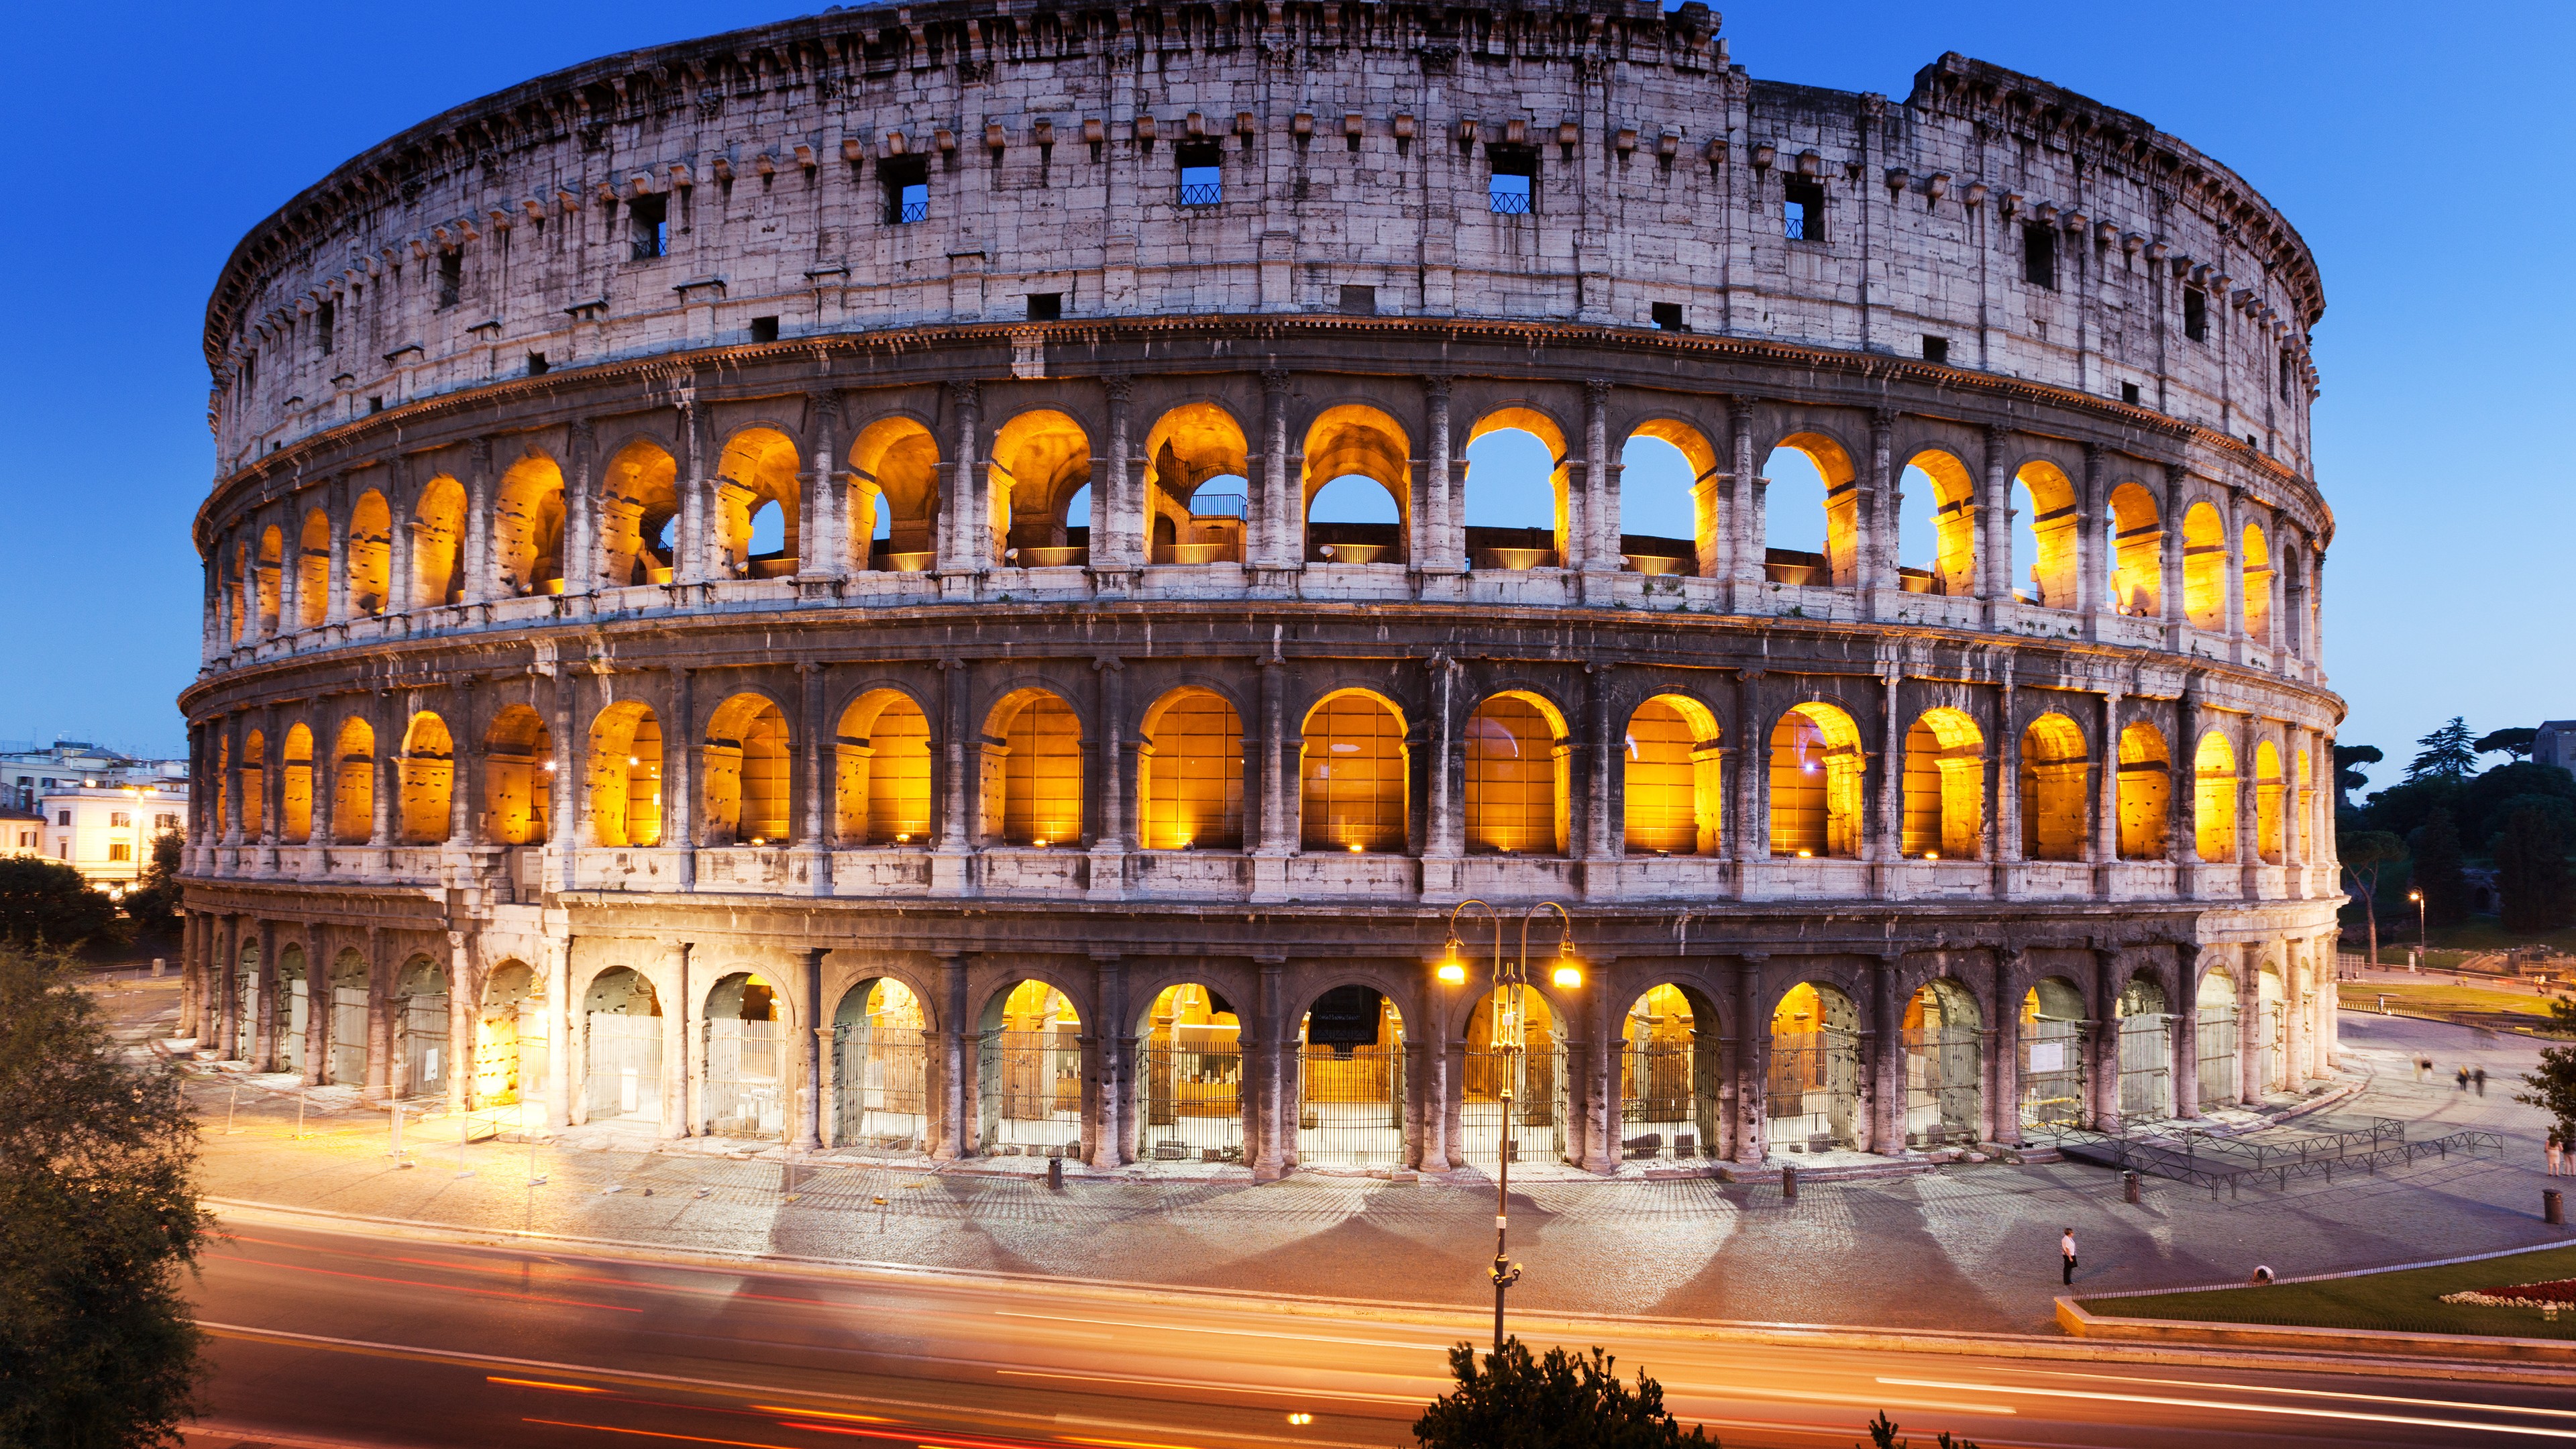 General 3840x2160 Rome Colosseum city ancient Ancient Rome architecture Italy history ruins landmark World Heritage Site Europe